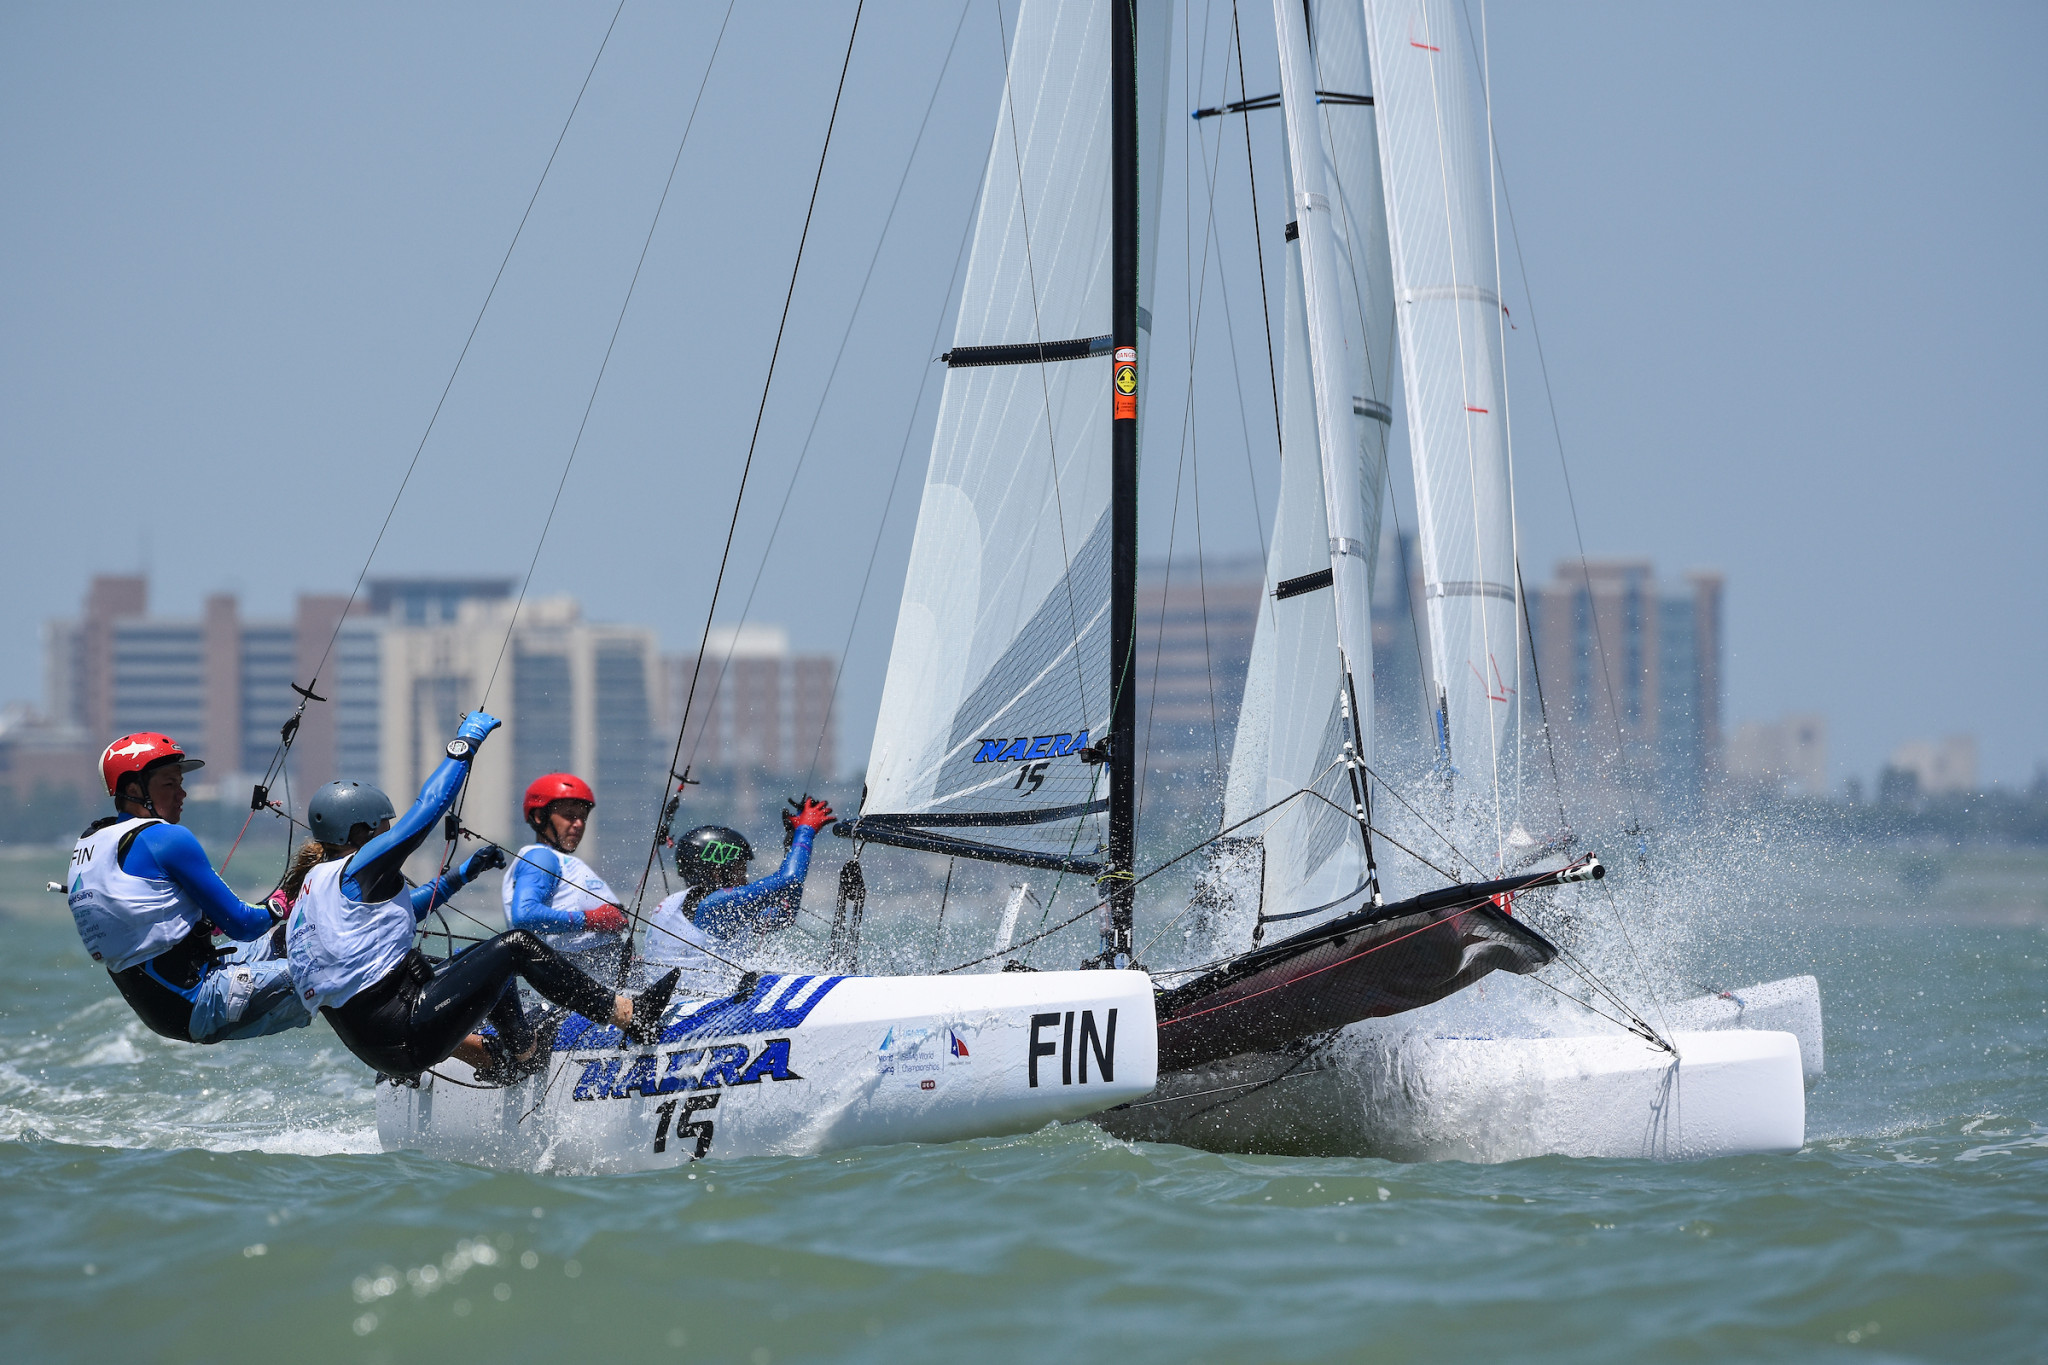 World Sailing has welcomed interest from nations to host the Youth Sailing World Championships in 2021 ©World Sailing